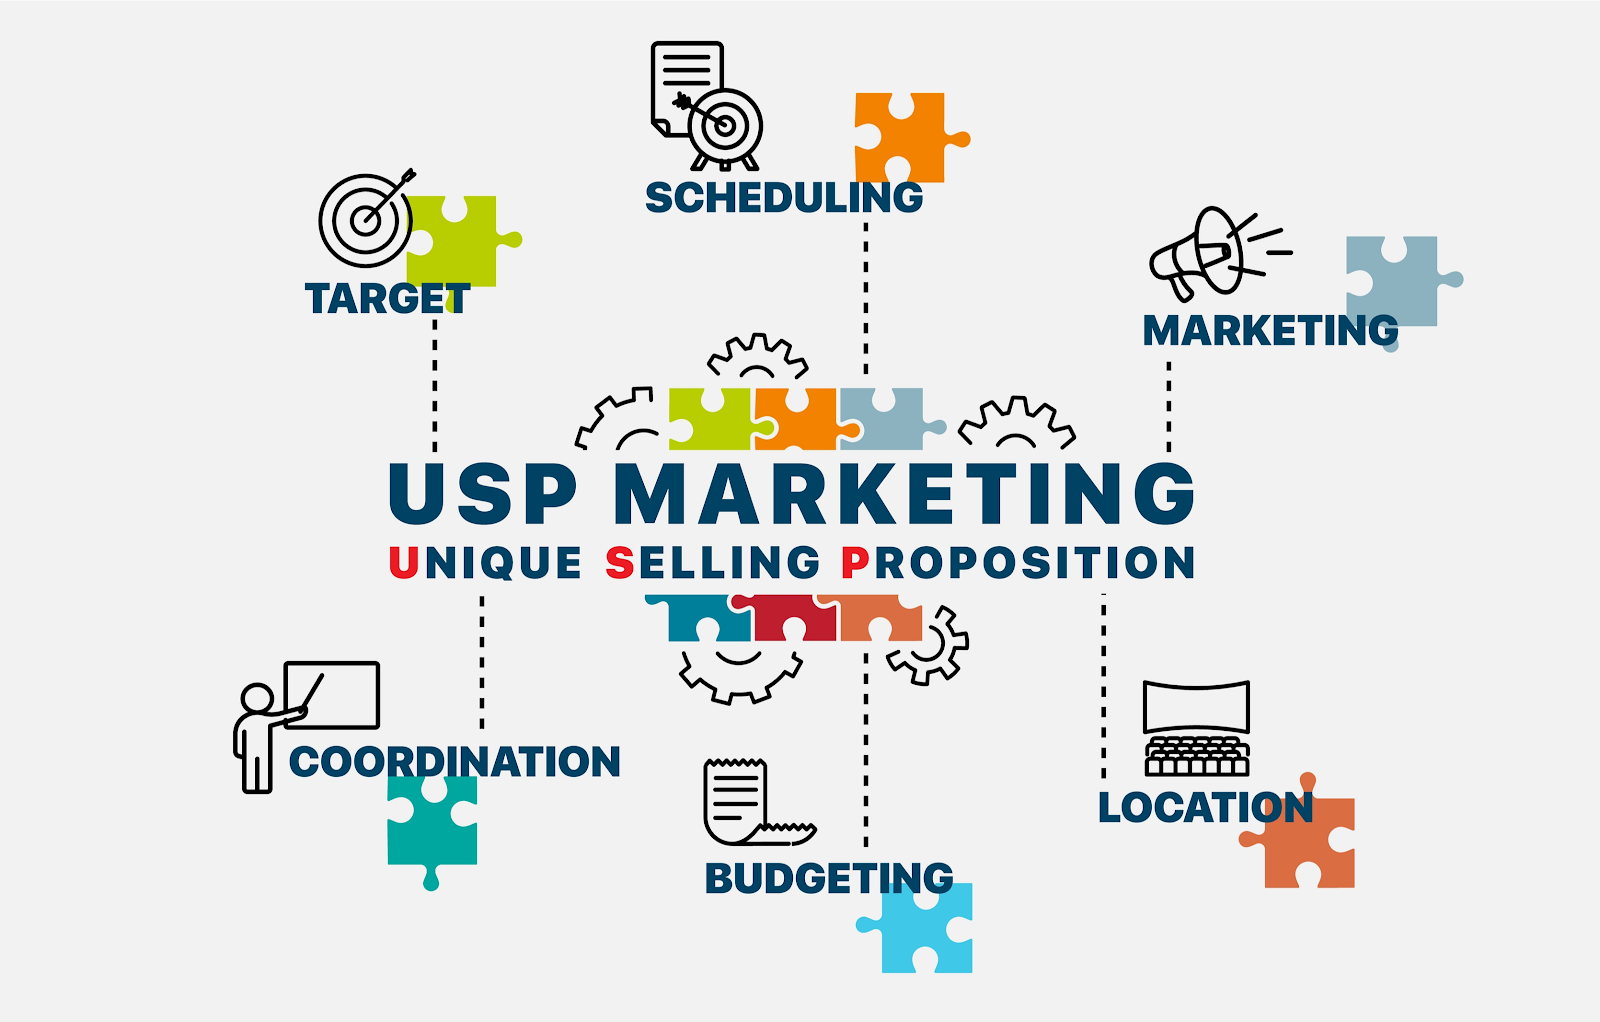 A USP is part of your overall marketing